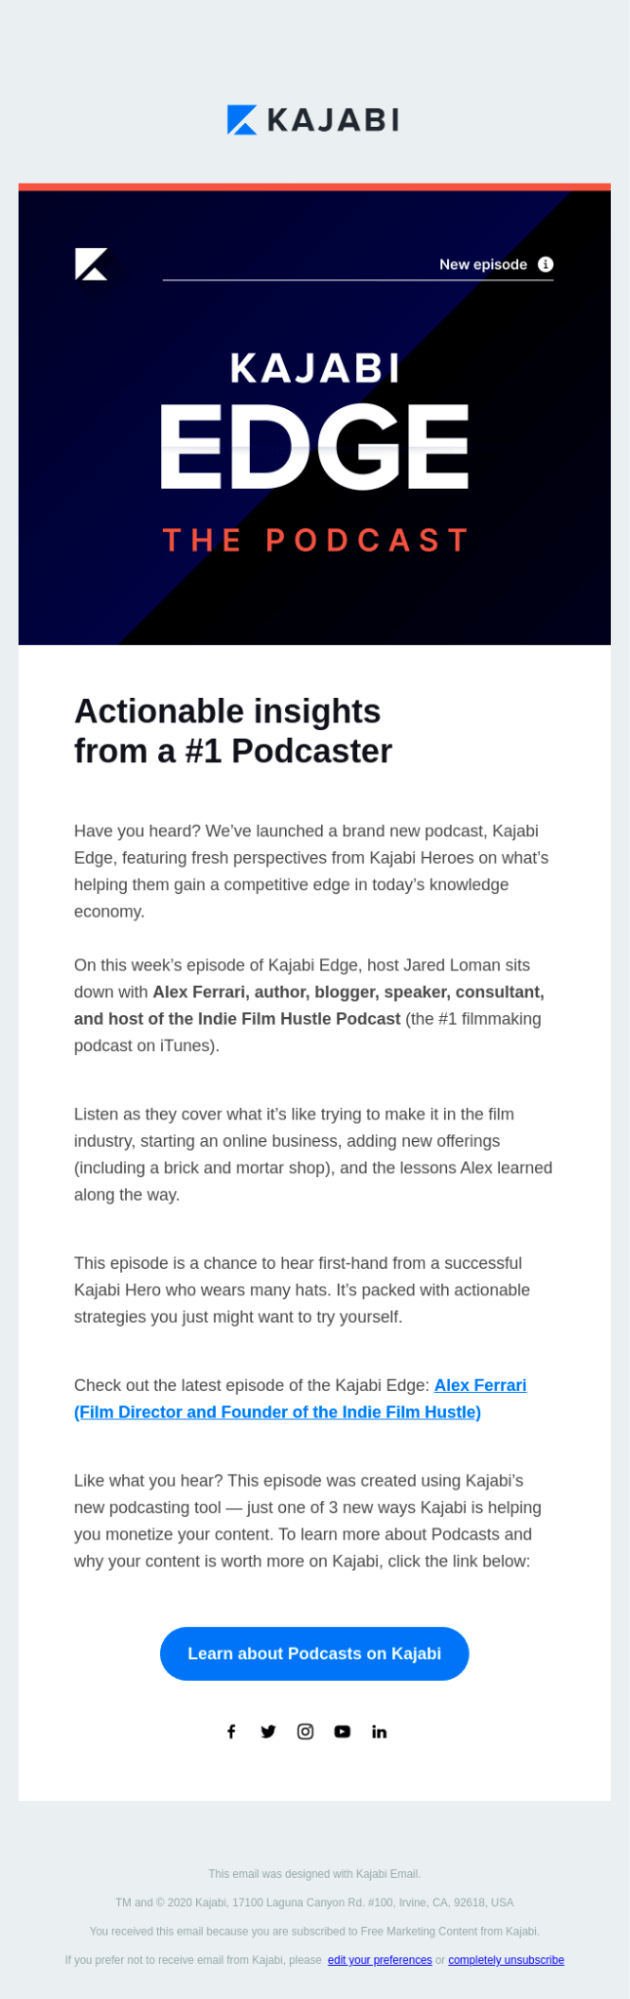 Email Engagement Content Ideas: Screenshot of Kajabi's email featuring their podcast